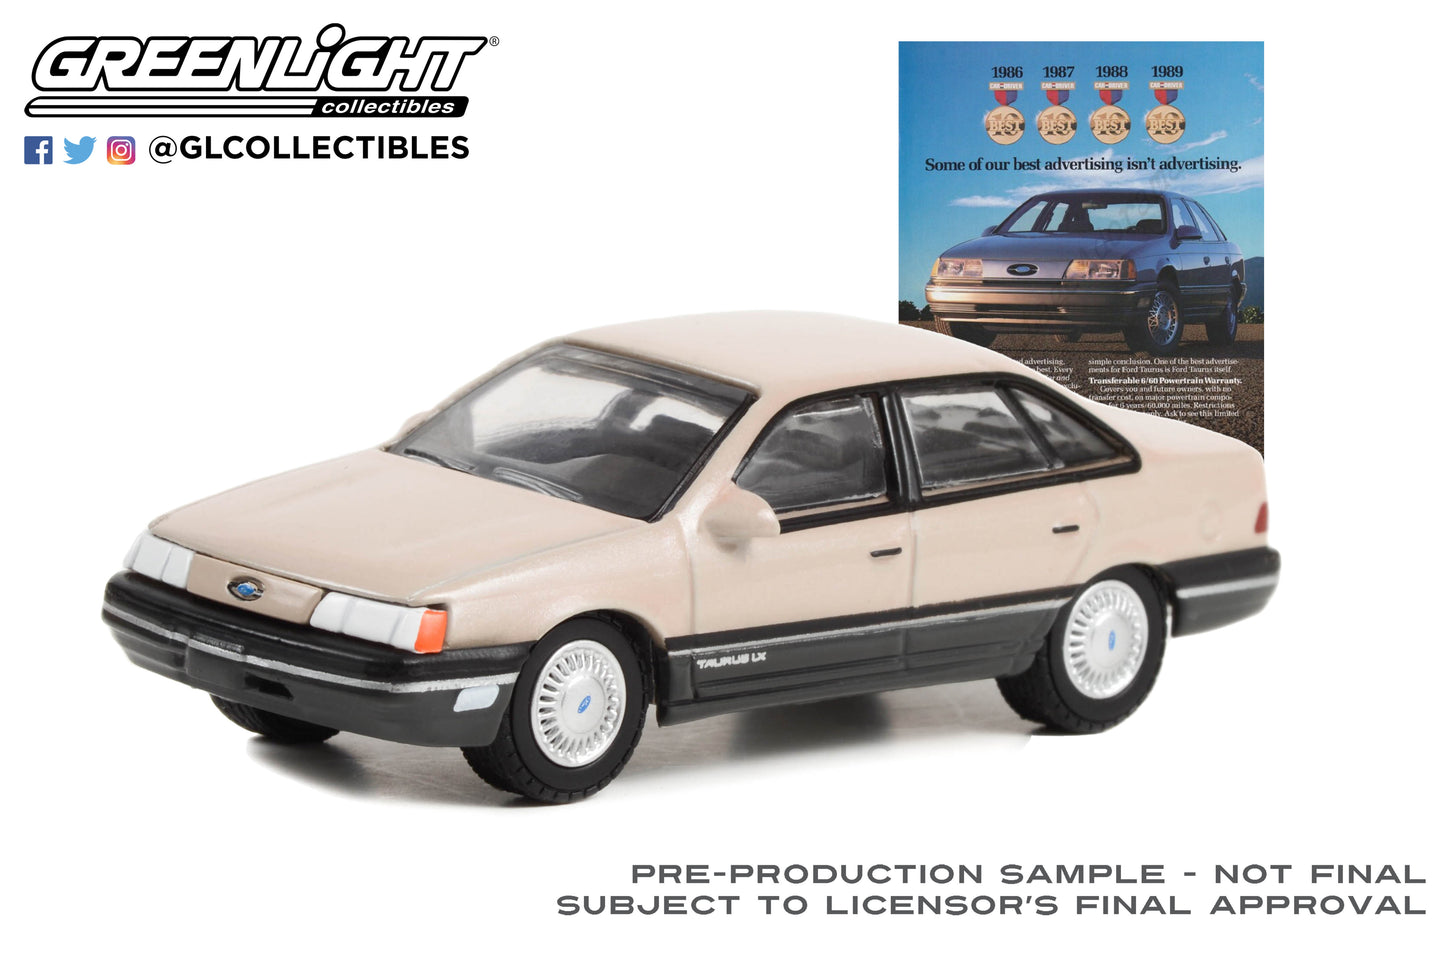 GreenLight 1:64 Vintage Ad Cars Series 8 - 1989 Ford Taurus “Some Of Our Best Advertising Isn’t Advertising” 39110-E